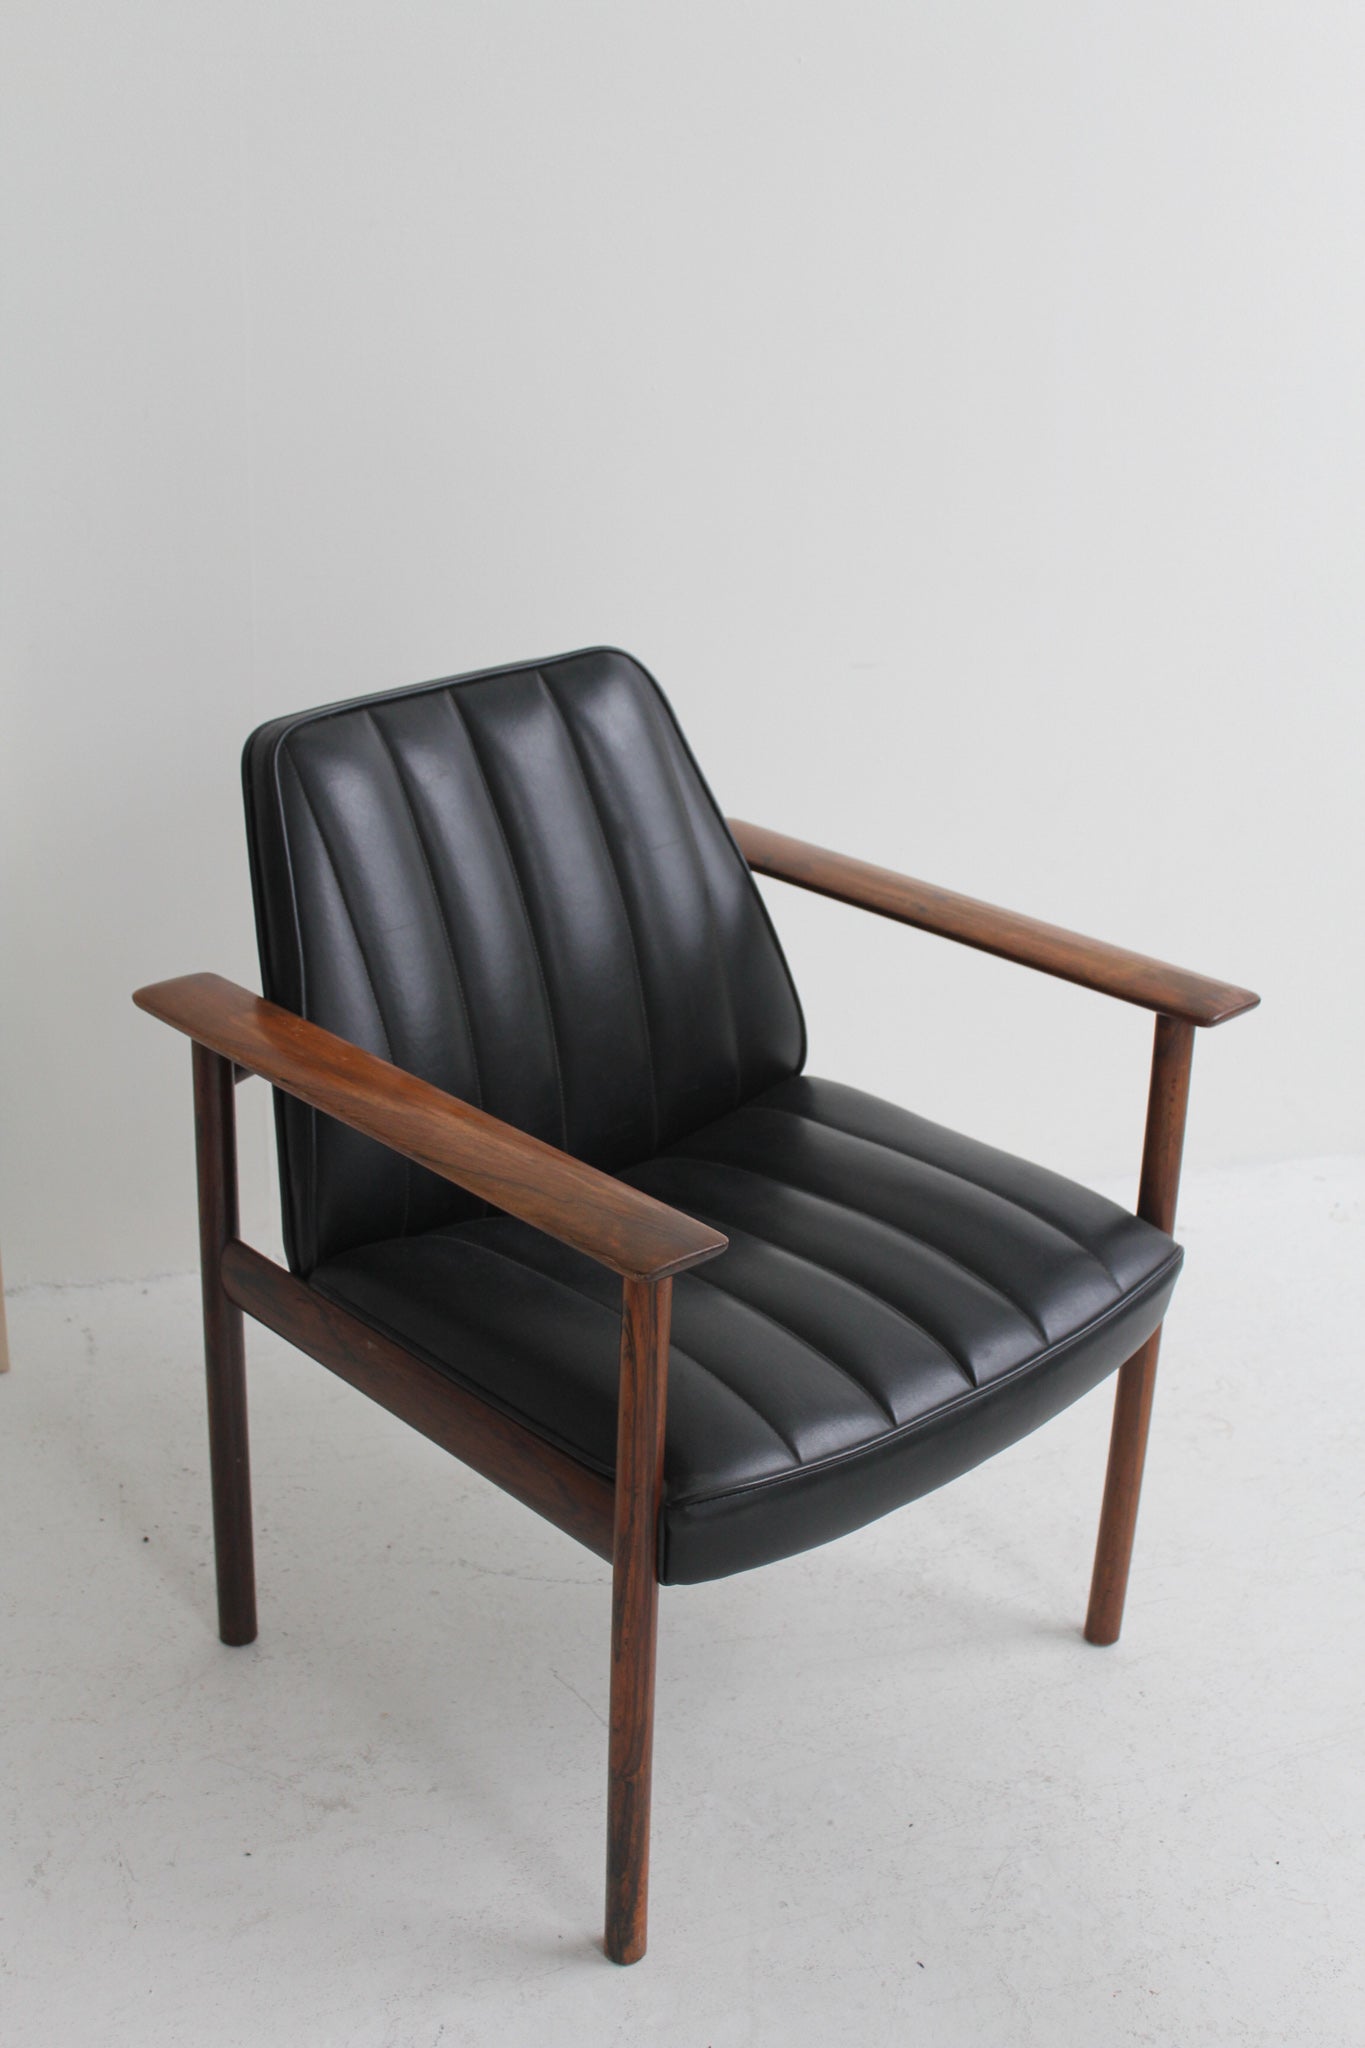 Leather and Rosewood Armchair by Sven Ivar Dysthe for Dokka Mobler